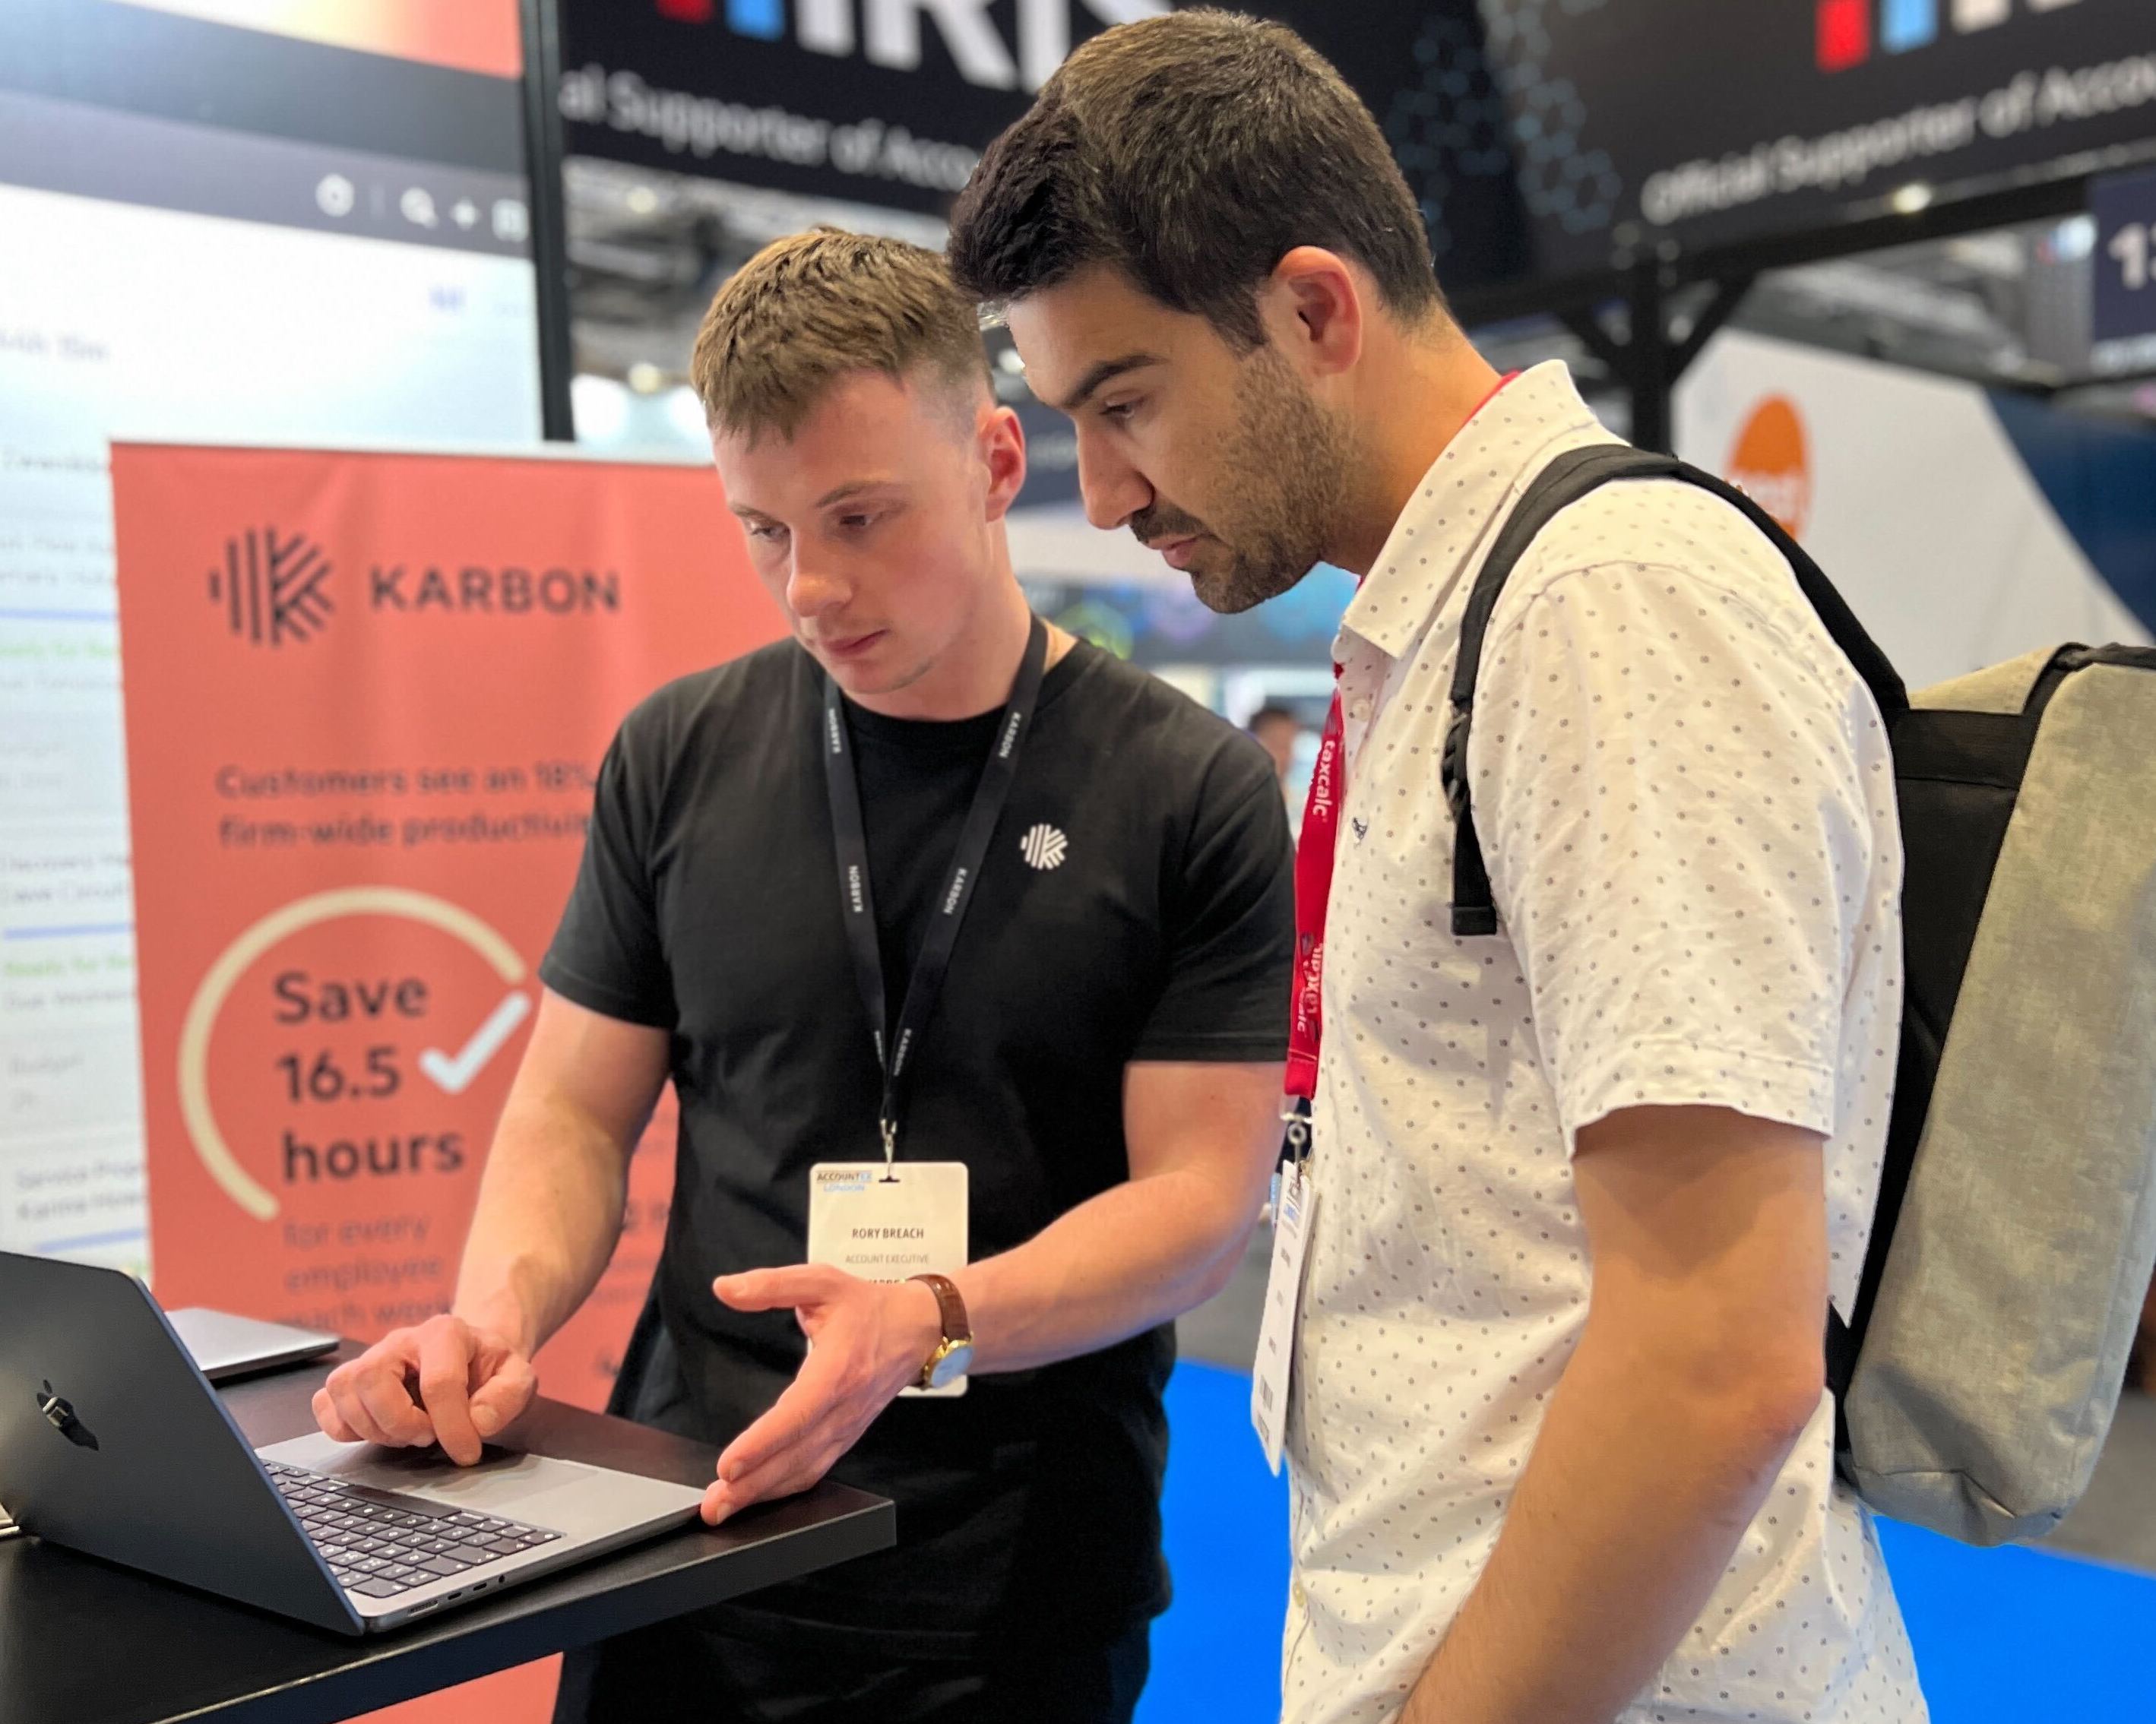 Rory walking someone through the features and functionality of Karbon during a demo at Accountex London 2023.